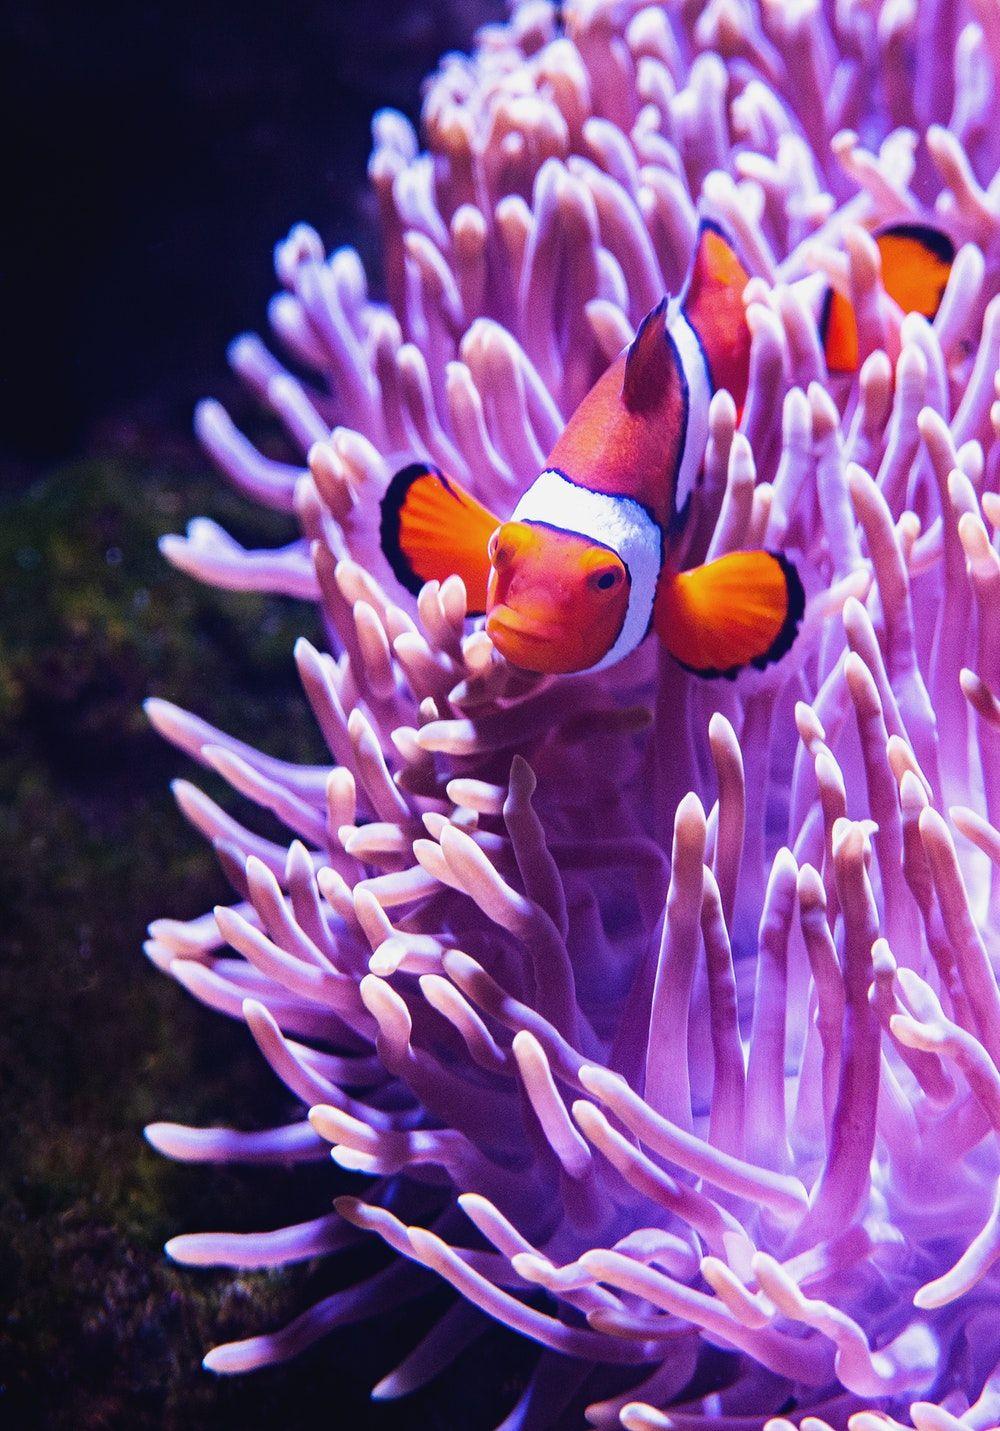 Clown Fish Picture. Download Free Image